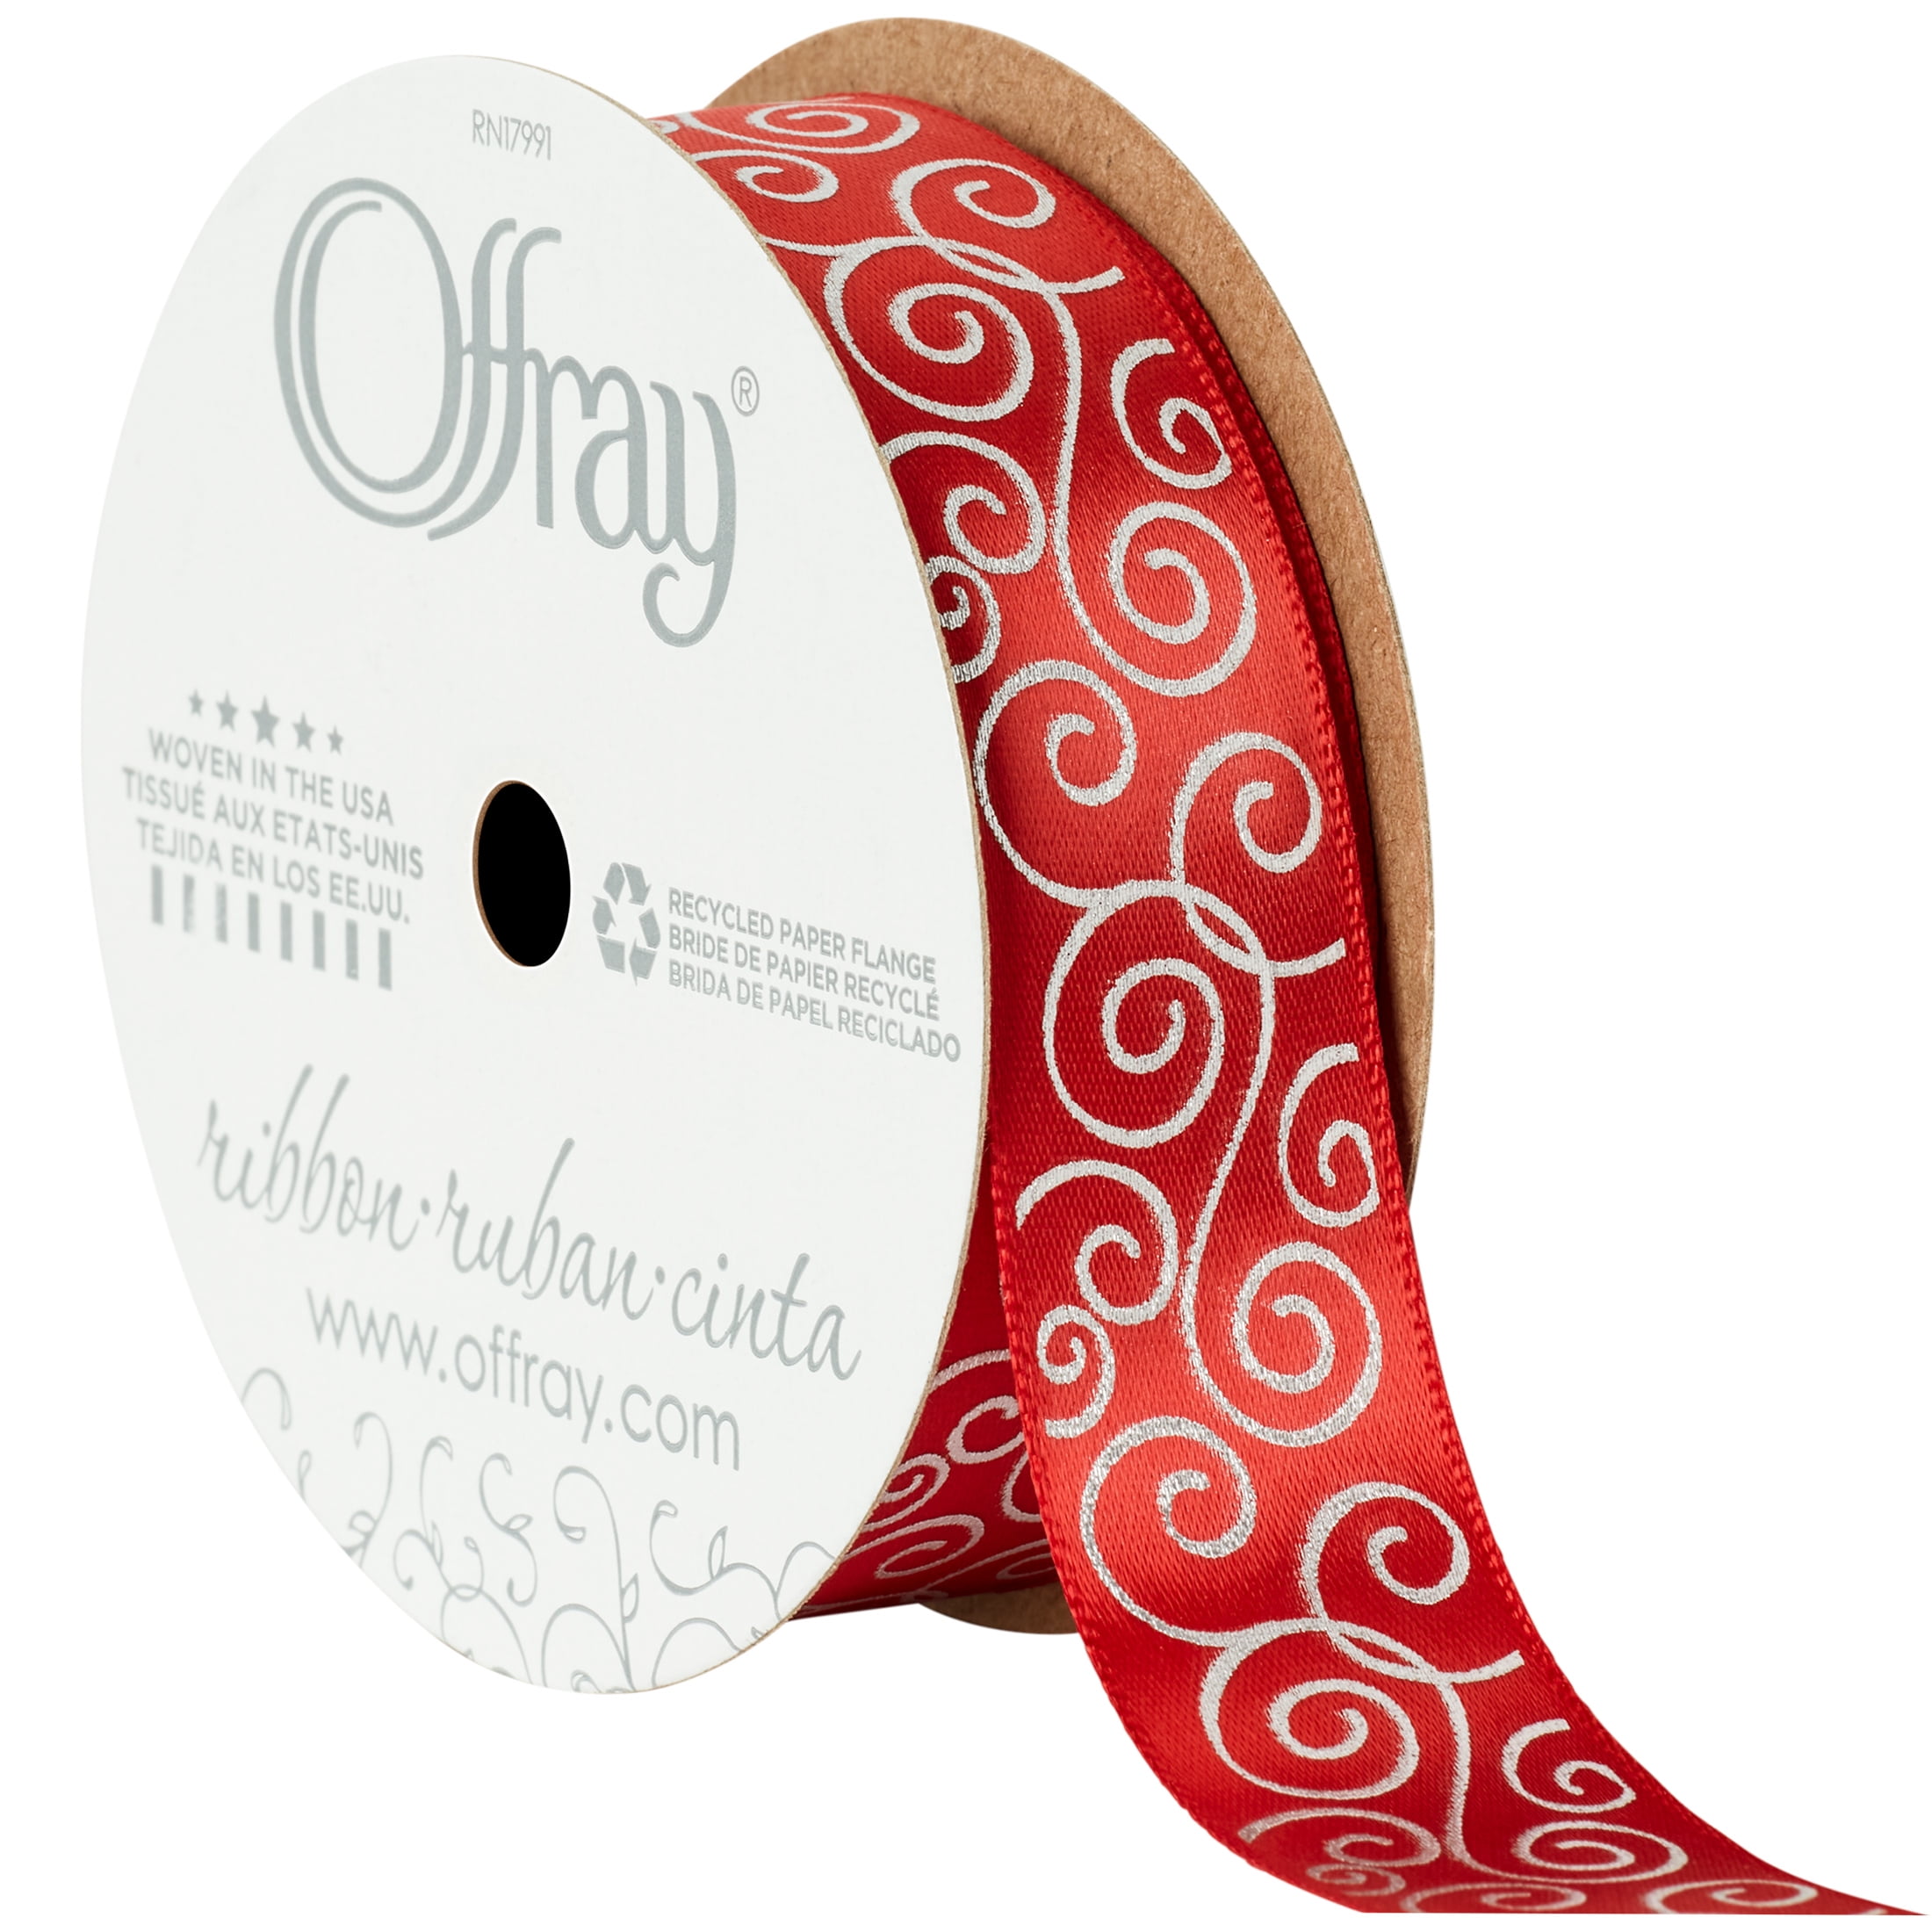 Offray Ribbon, Red 7/8 inch Single Face Satin Polyester Ribbon, 9 feet